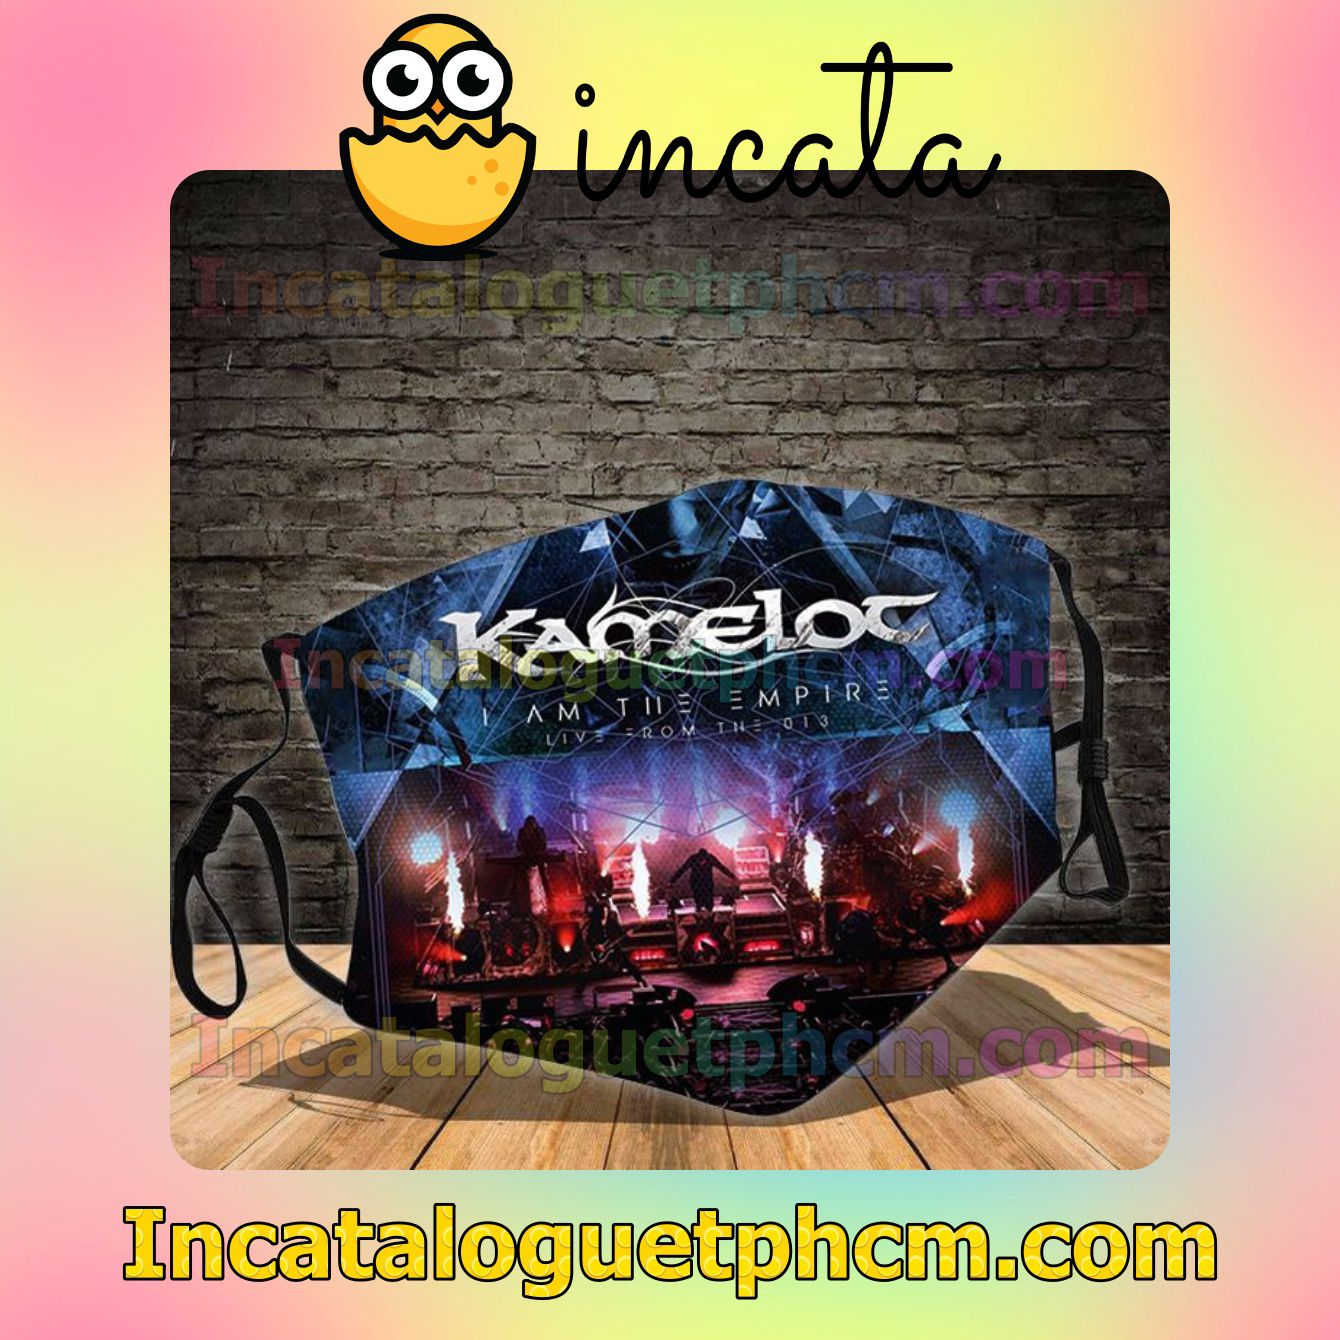 Kamelot I Am The Empire Live From The 013 Album Cover Cotton Masks